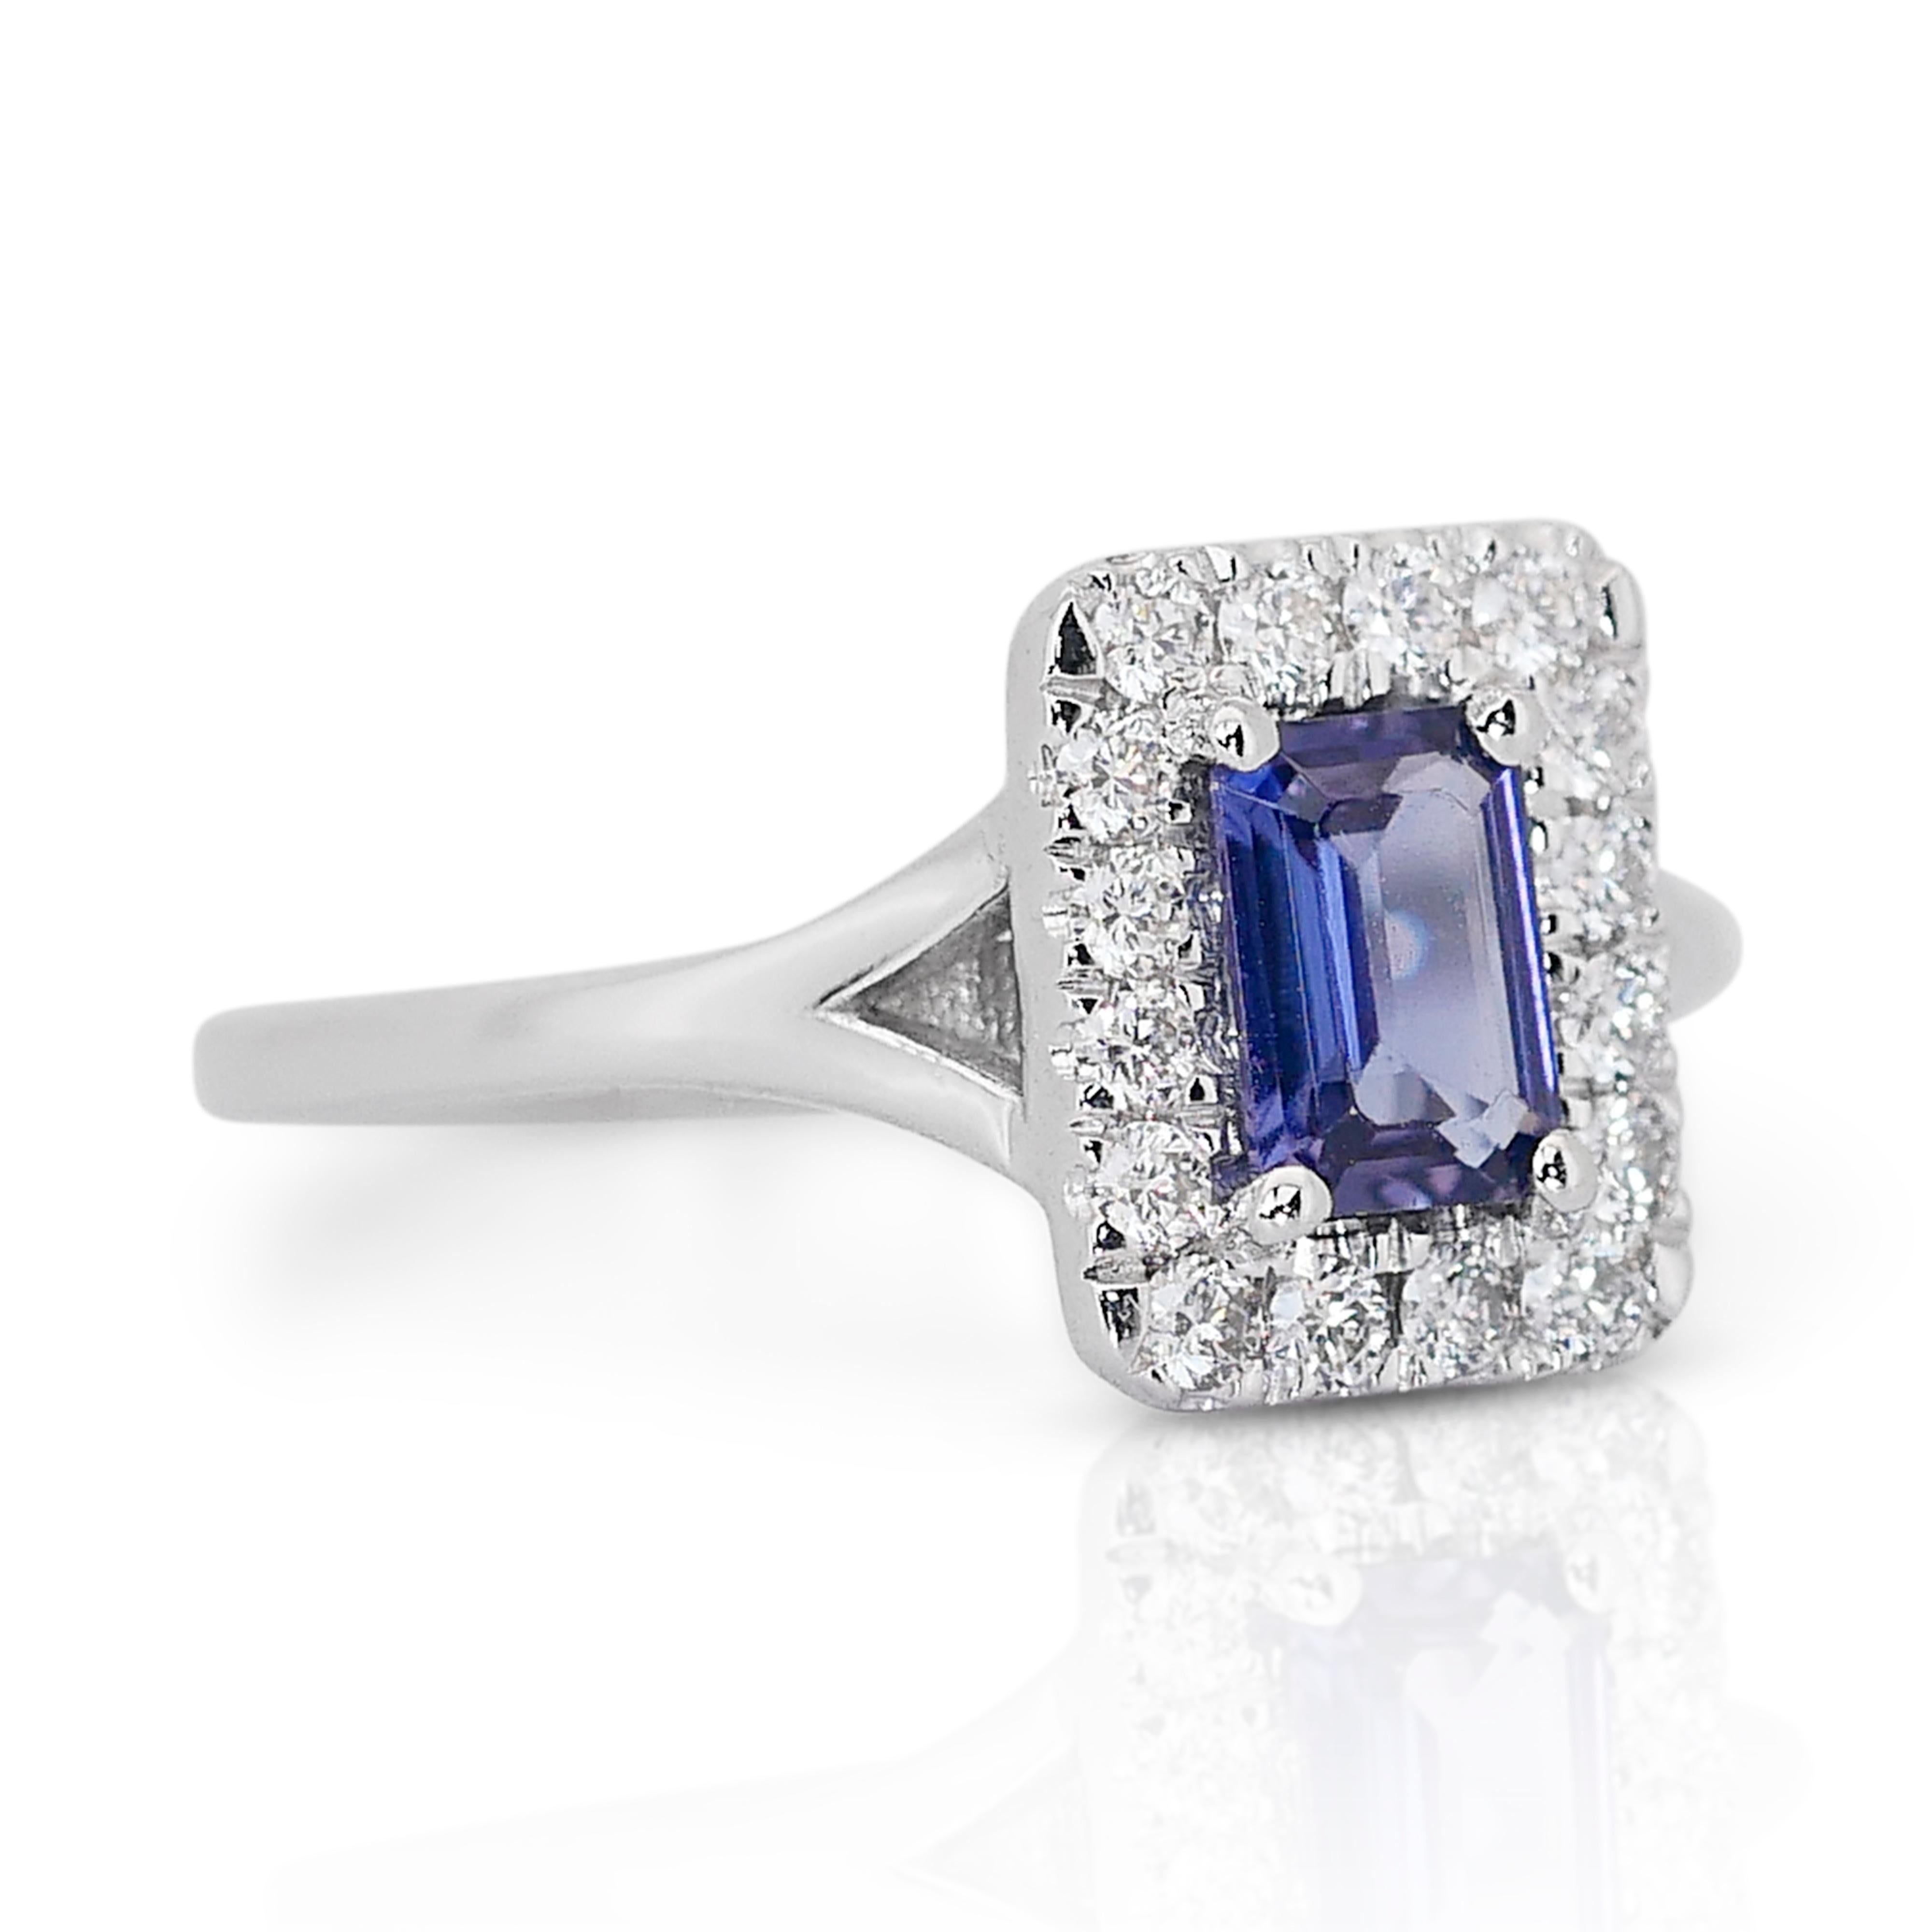 Enchanting 0.93ct Tanzanite and Diamonds Halo Ring in 18k White Gold - IGI Certified

This stunning halo ring in 18k white gold features a rare 0.60-carat emerald-cut diamond in a unique violetish-blue color. Encircling the main stone, 16 round